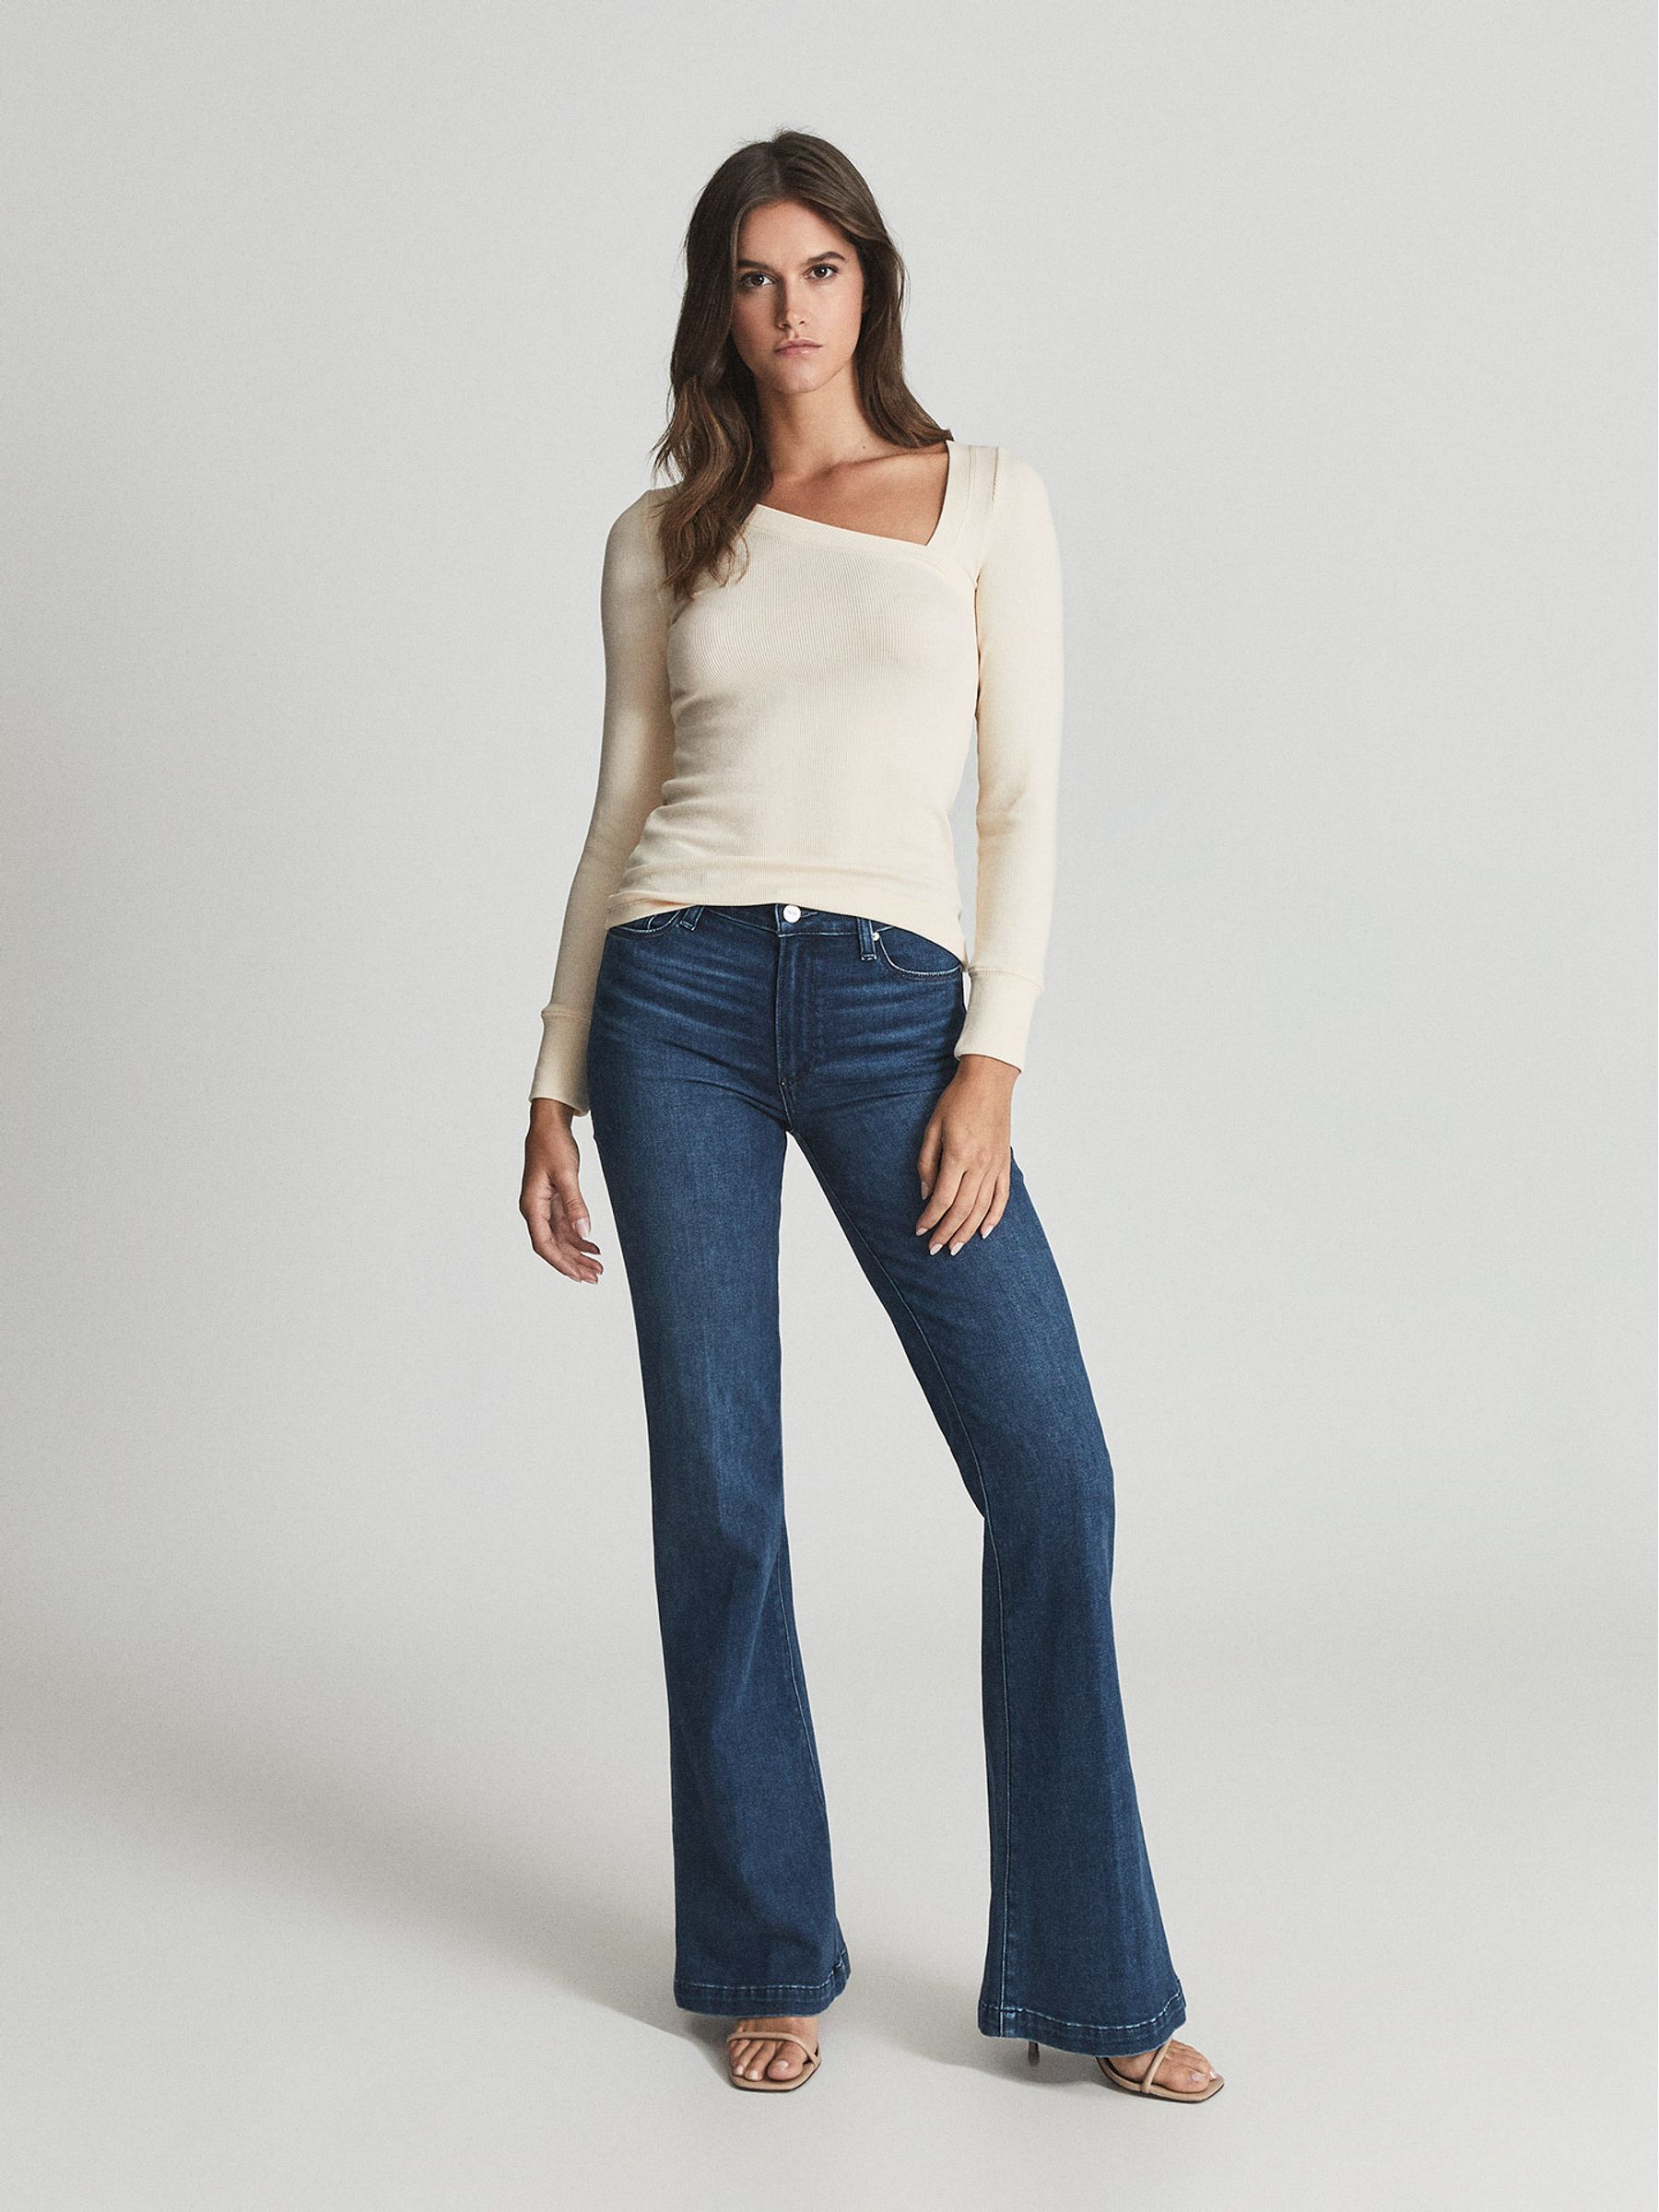 Reiss Genevieve Paige High Rise Flared Jeans - REISS